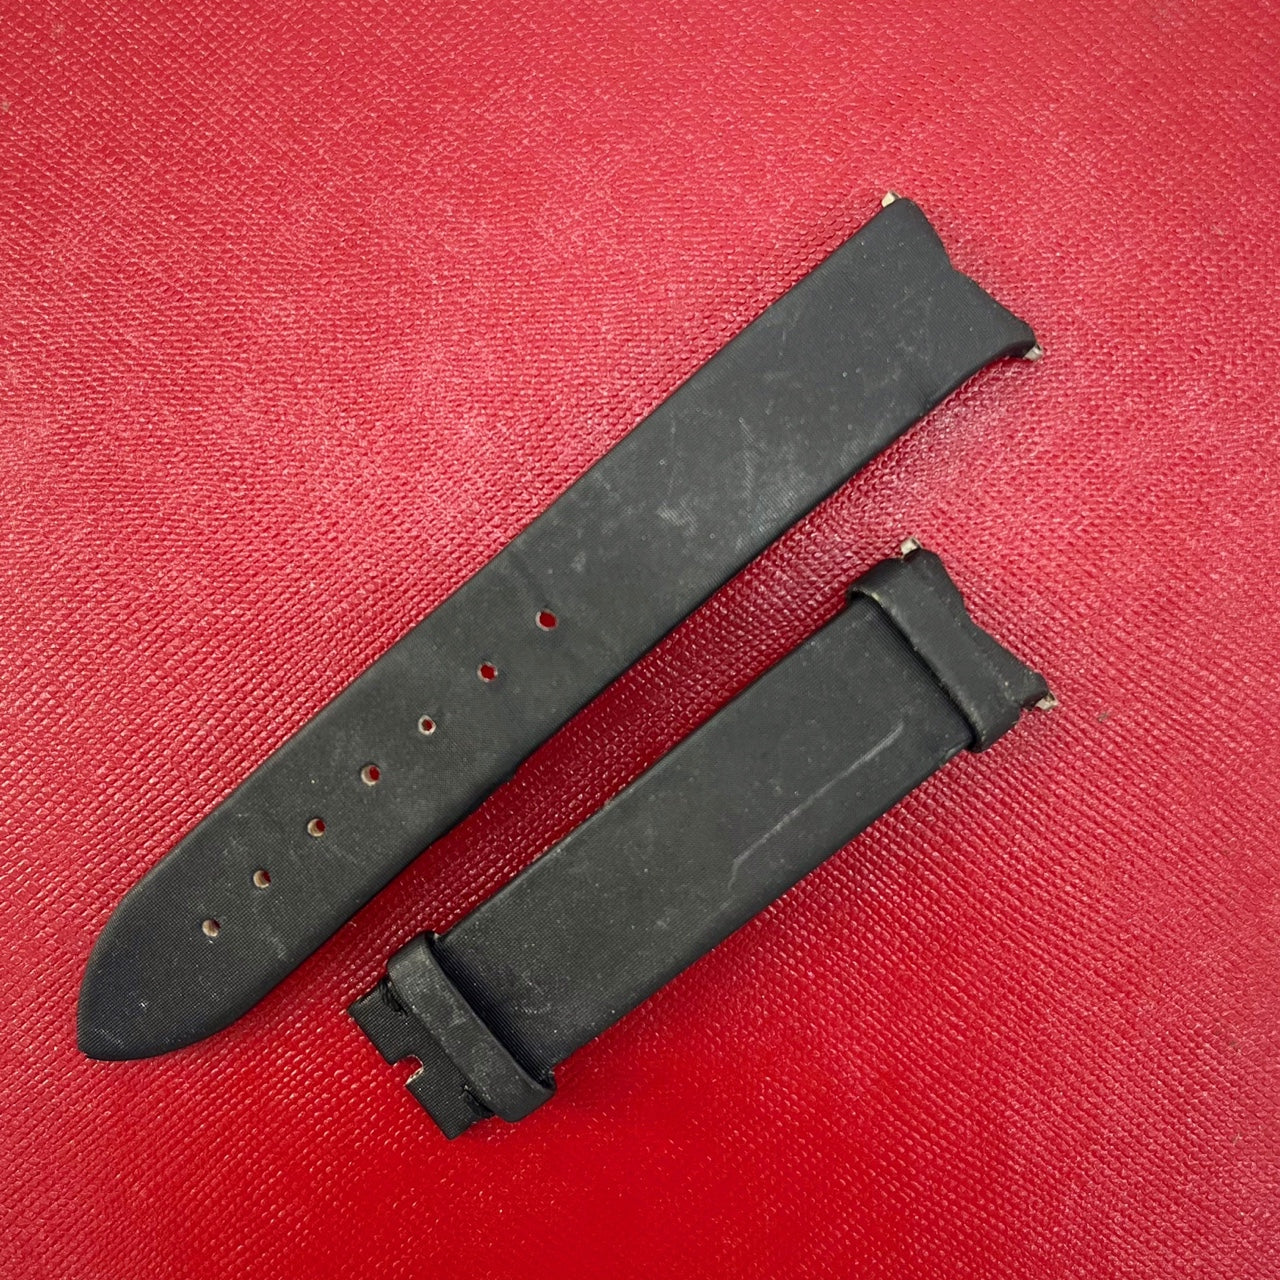 Guarantee Authentic Piaget Black Satin On Leather Strap 18mmx16mm Watch Band